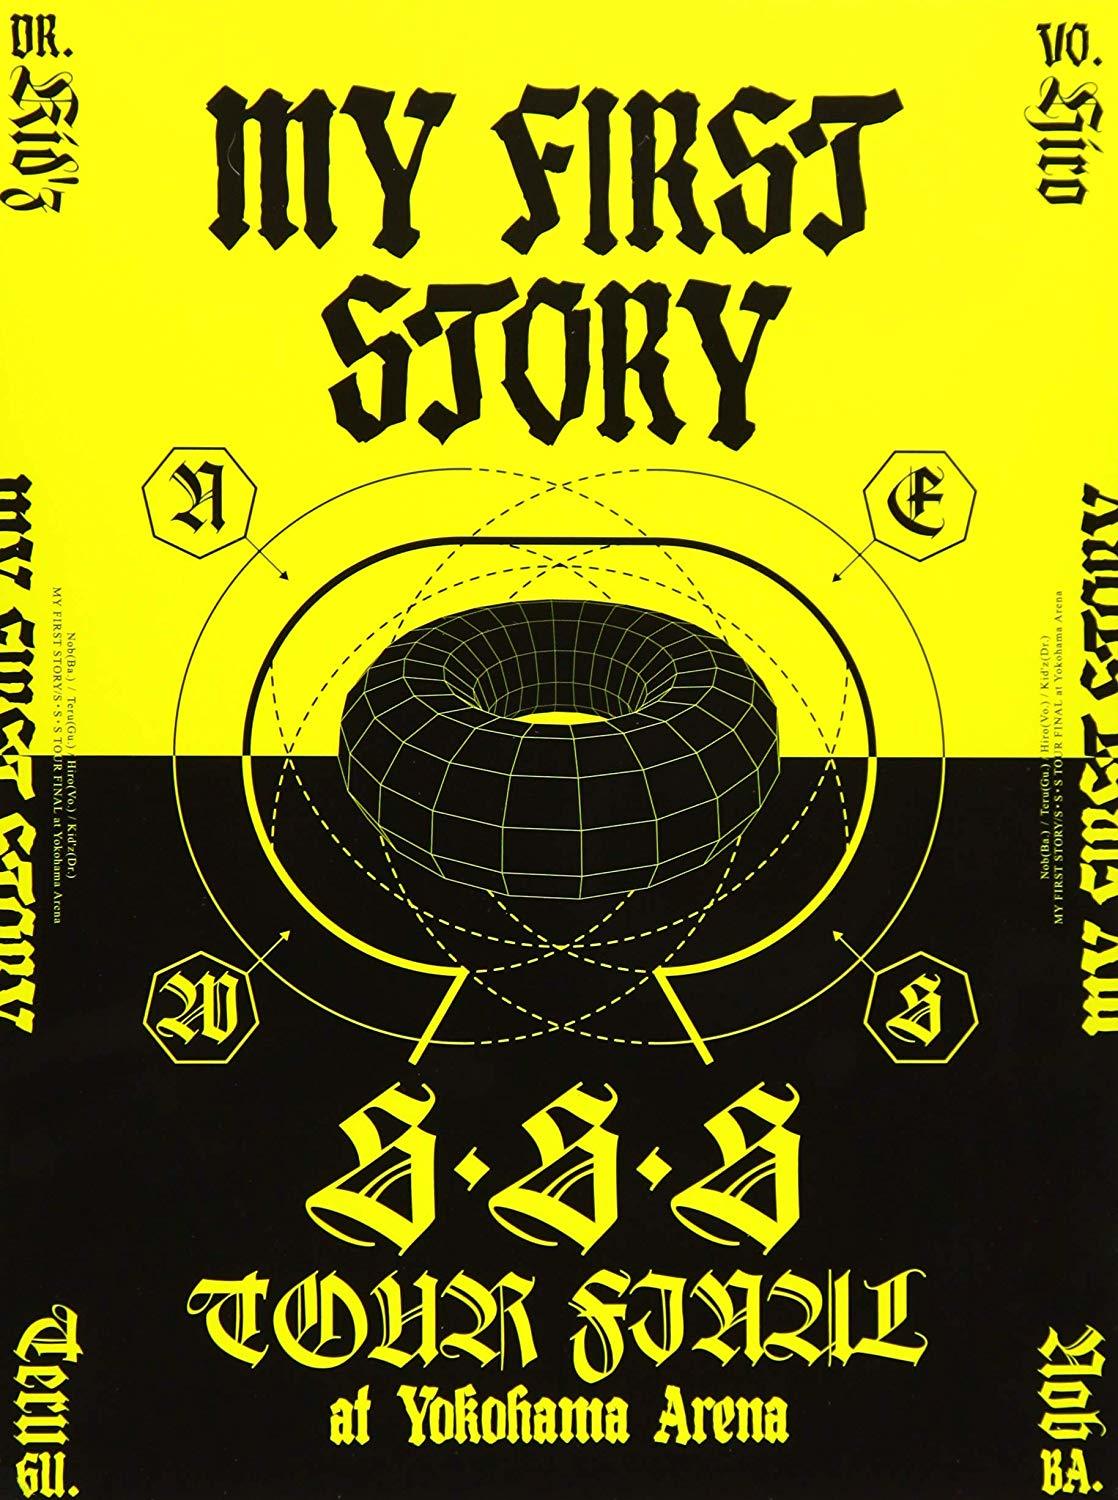 MY FIRST STORY「S・S・S TOUR FINAL at Yokohama Arena」 | MY FIRST 